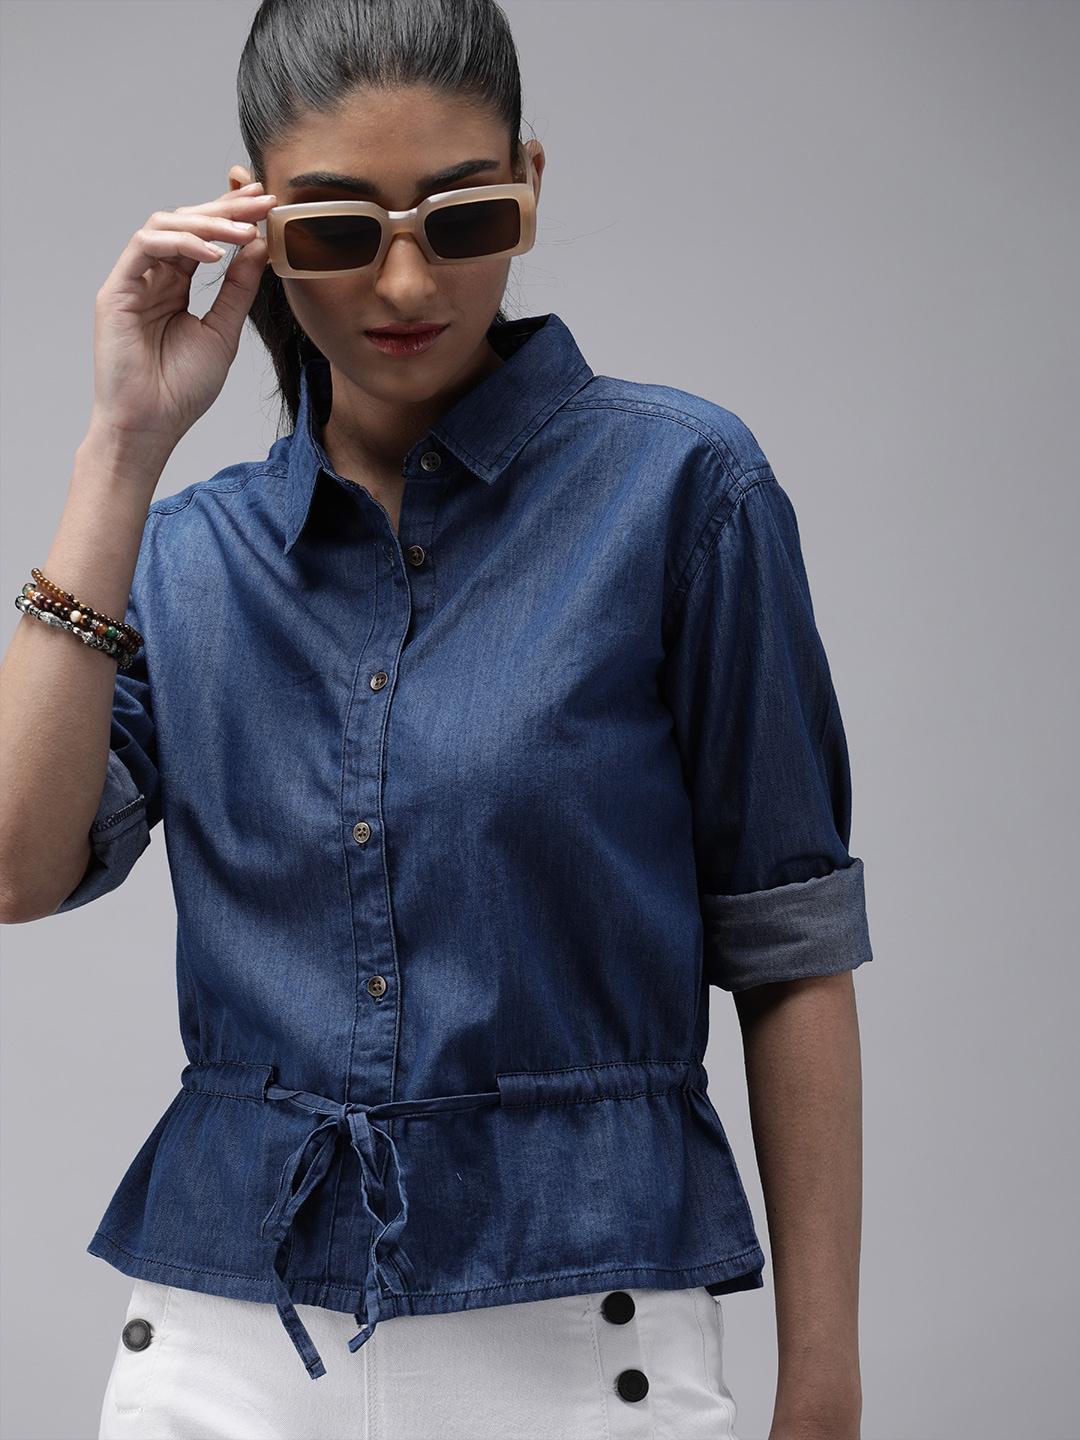 the-roadster-lifestyle-co-women-blue-denim-pure-cotton-shirt-style-top